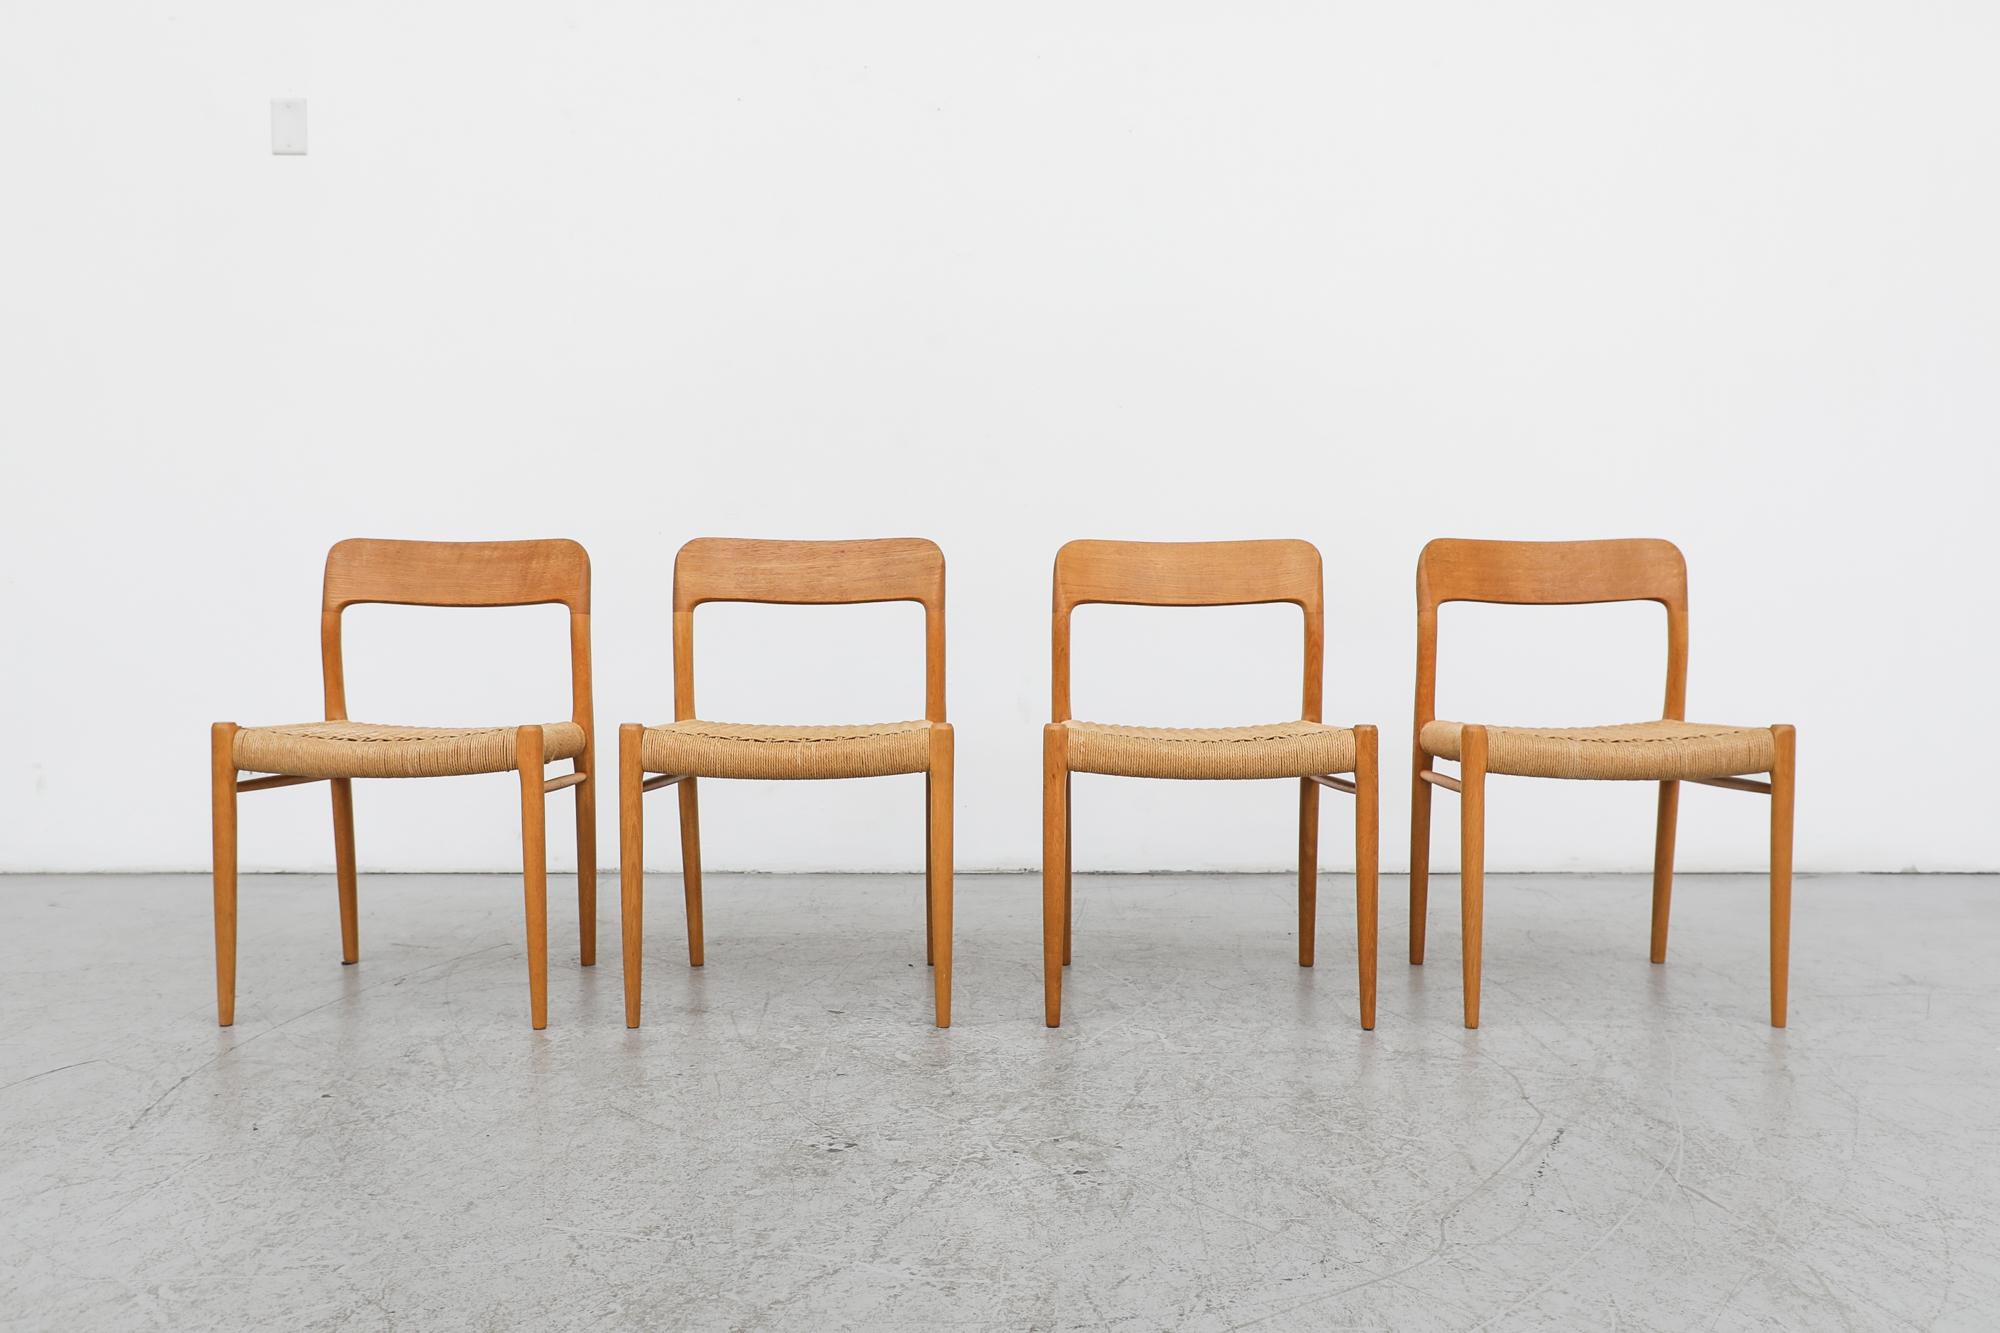 Mid-century set of 4 oak and paper cord side chairs designed in 1954 by Niels O. Møller for J.L. Møllers. Handsomely designed by the Danish designer, these 